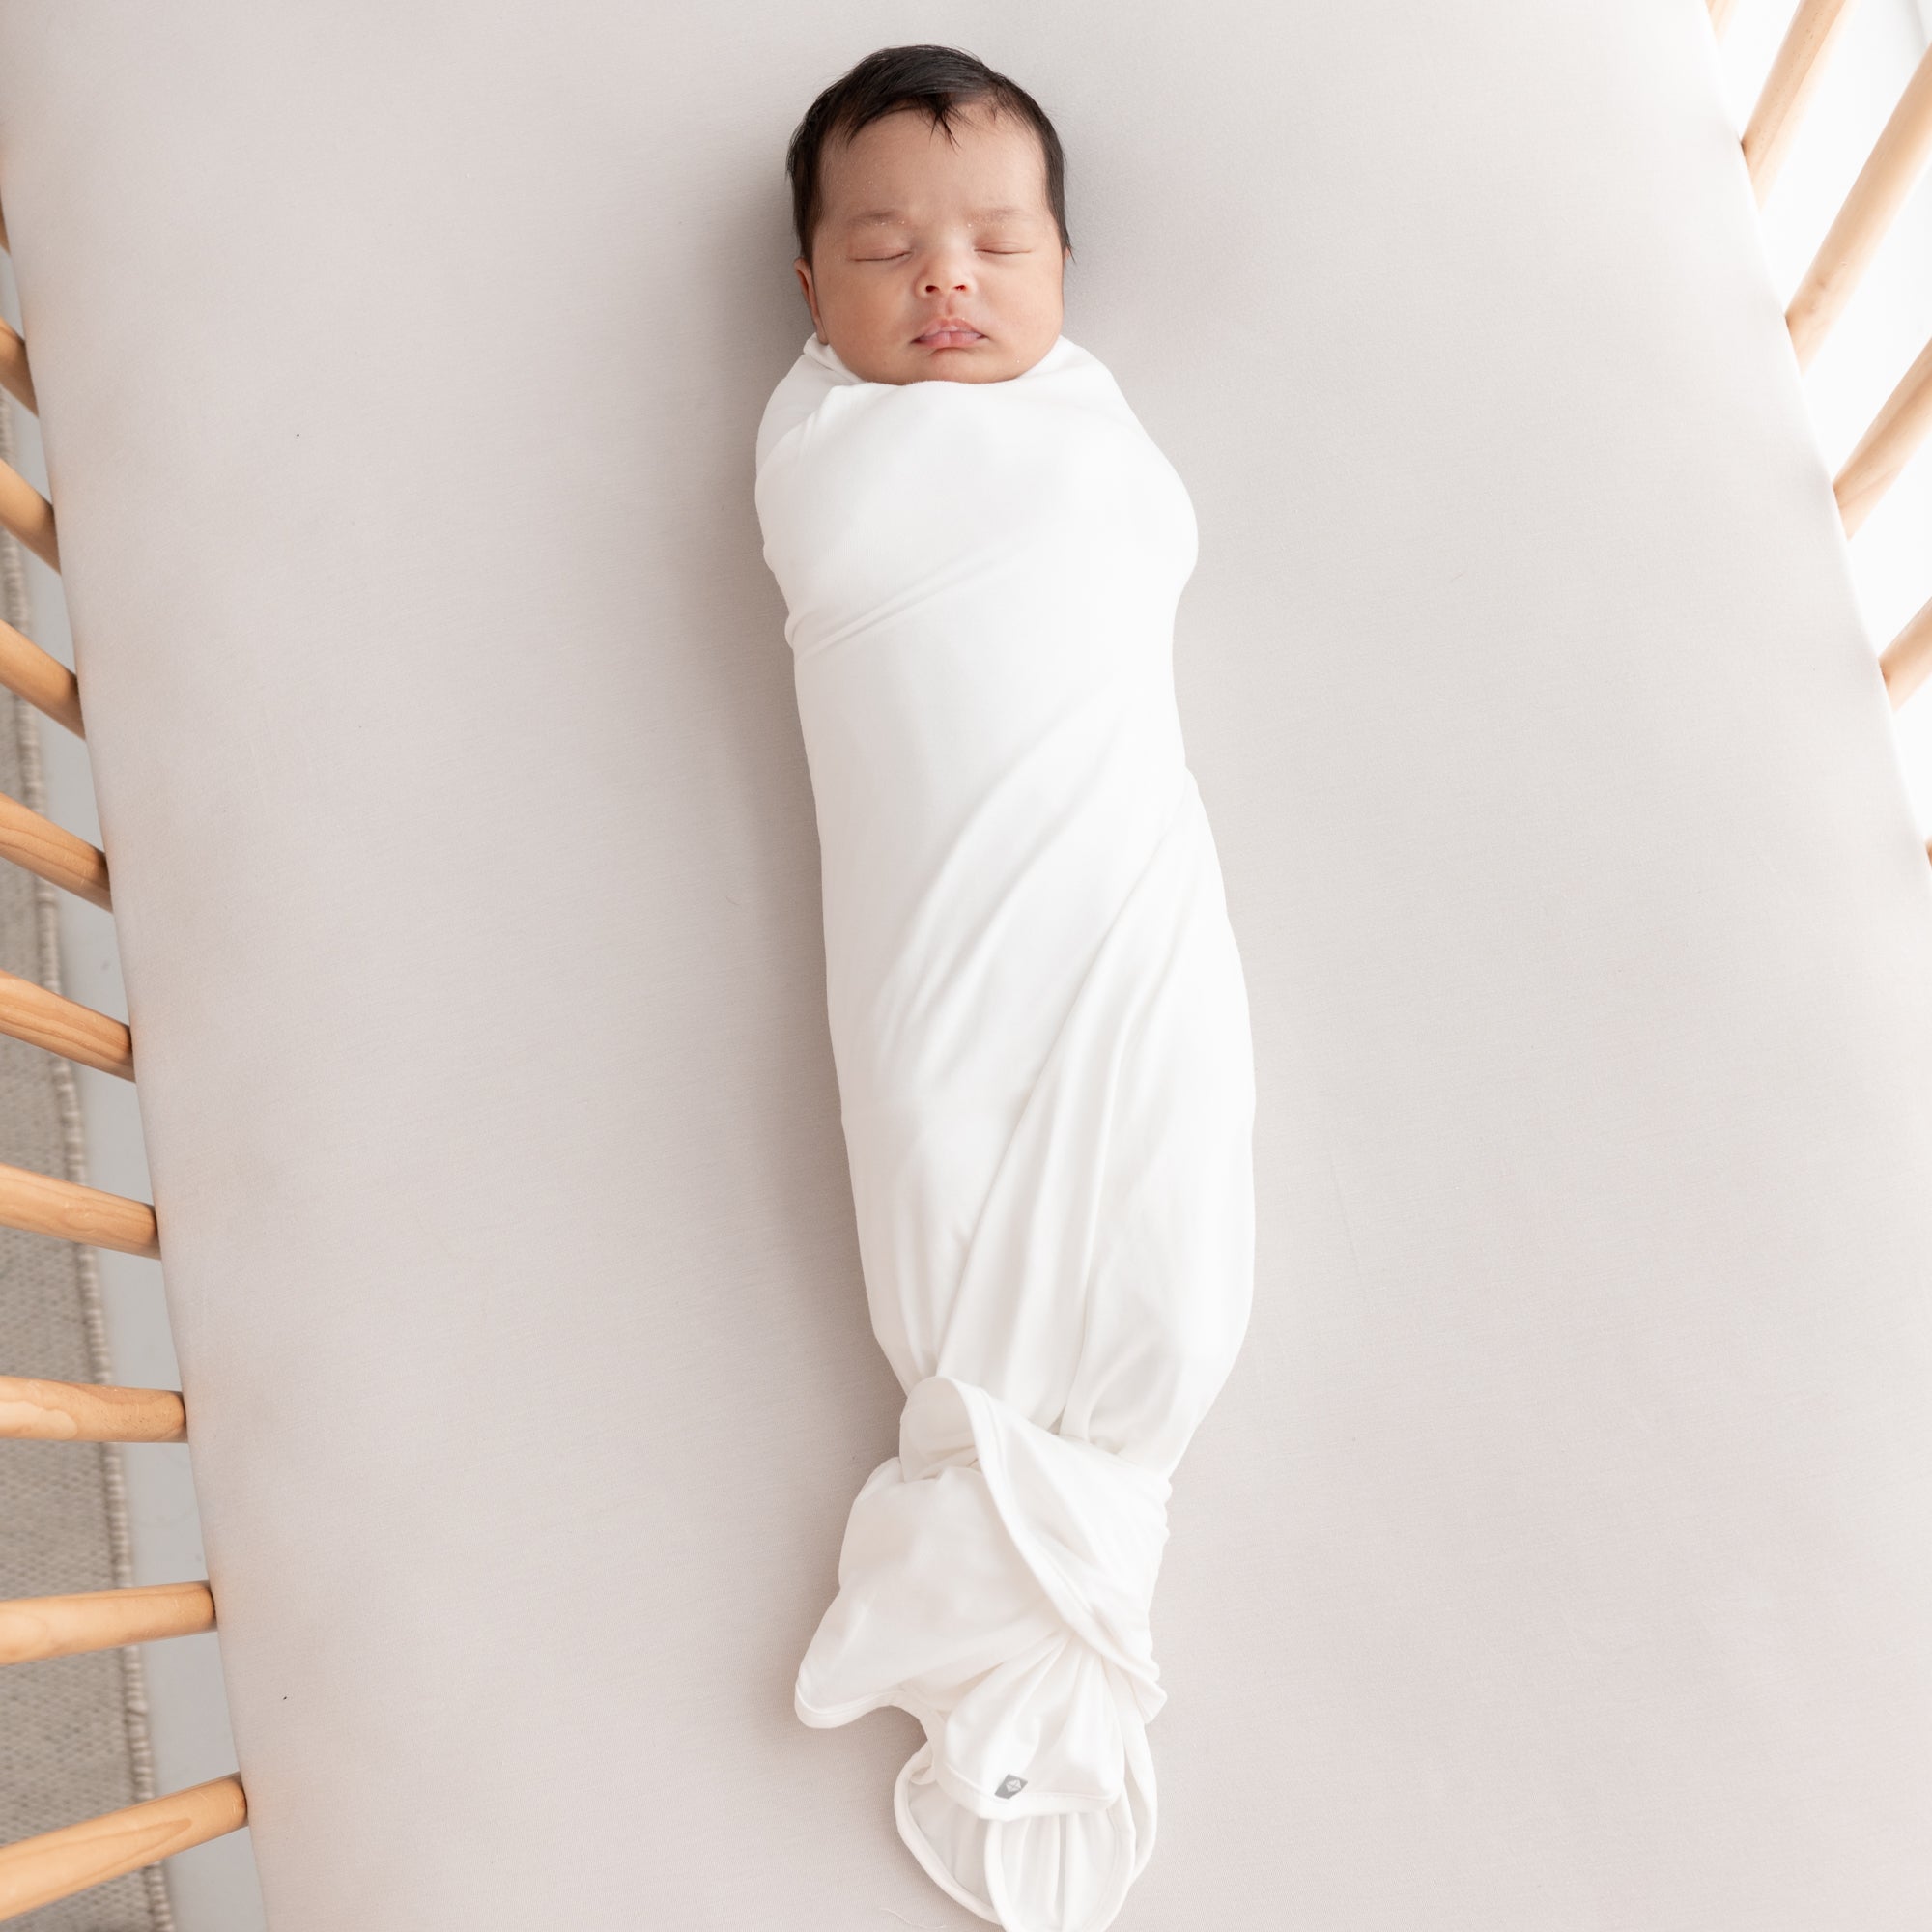 What are the Benefits of Swaddling a Baby?